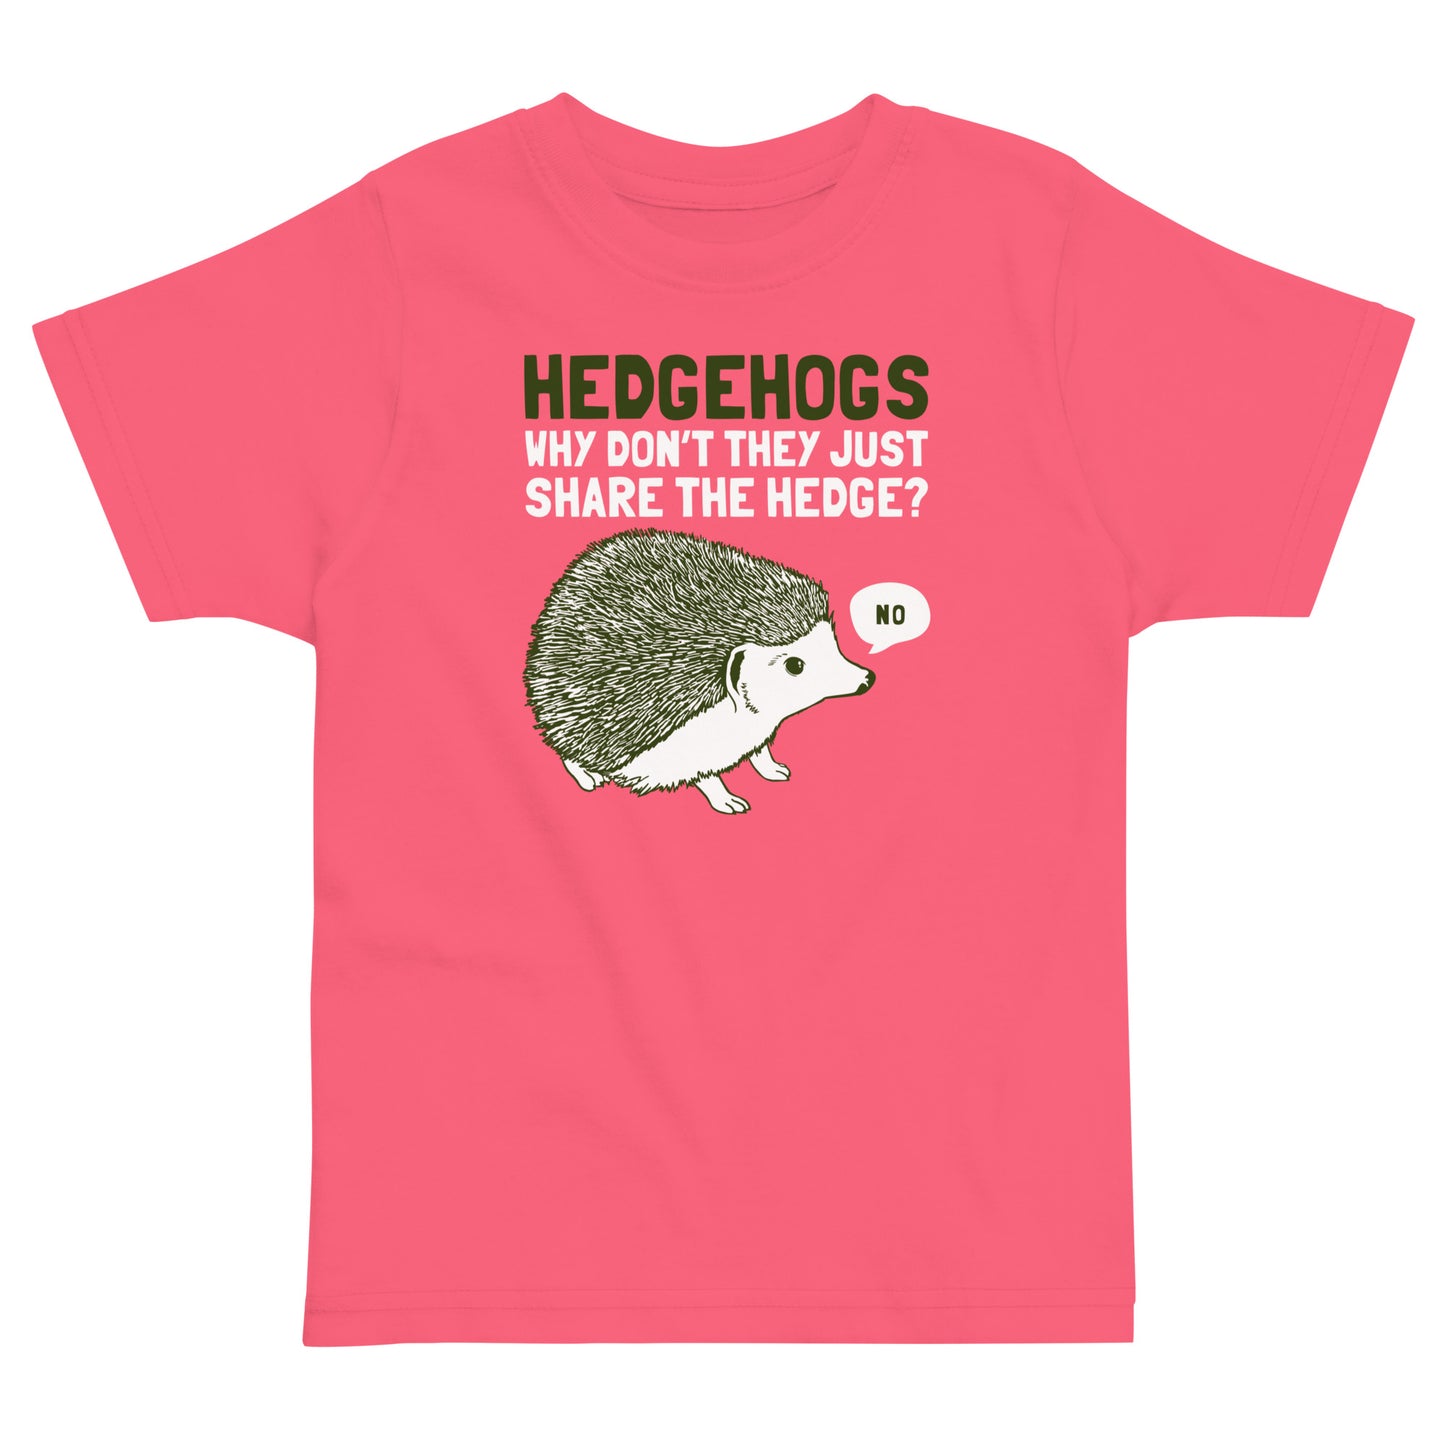 Hedgehogs Can't Share Kid's Toddler Tee